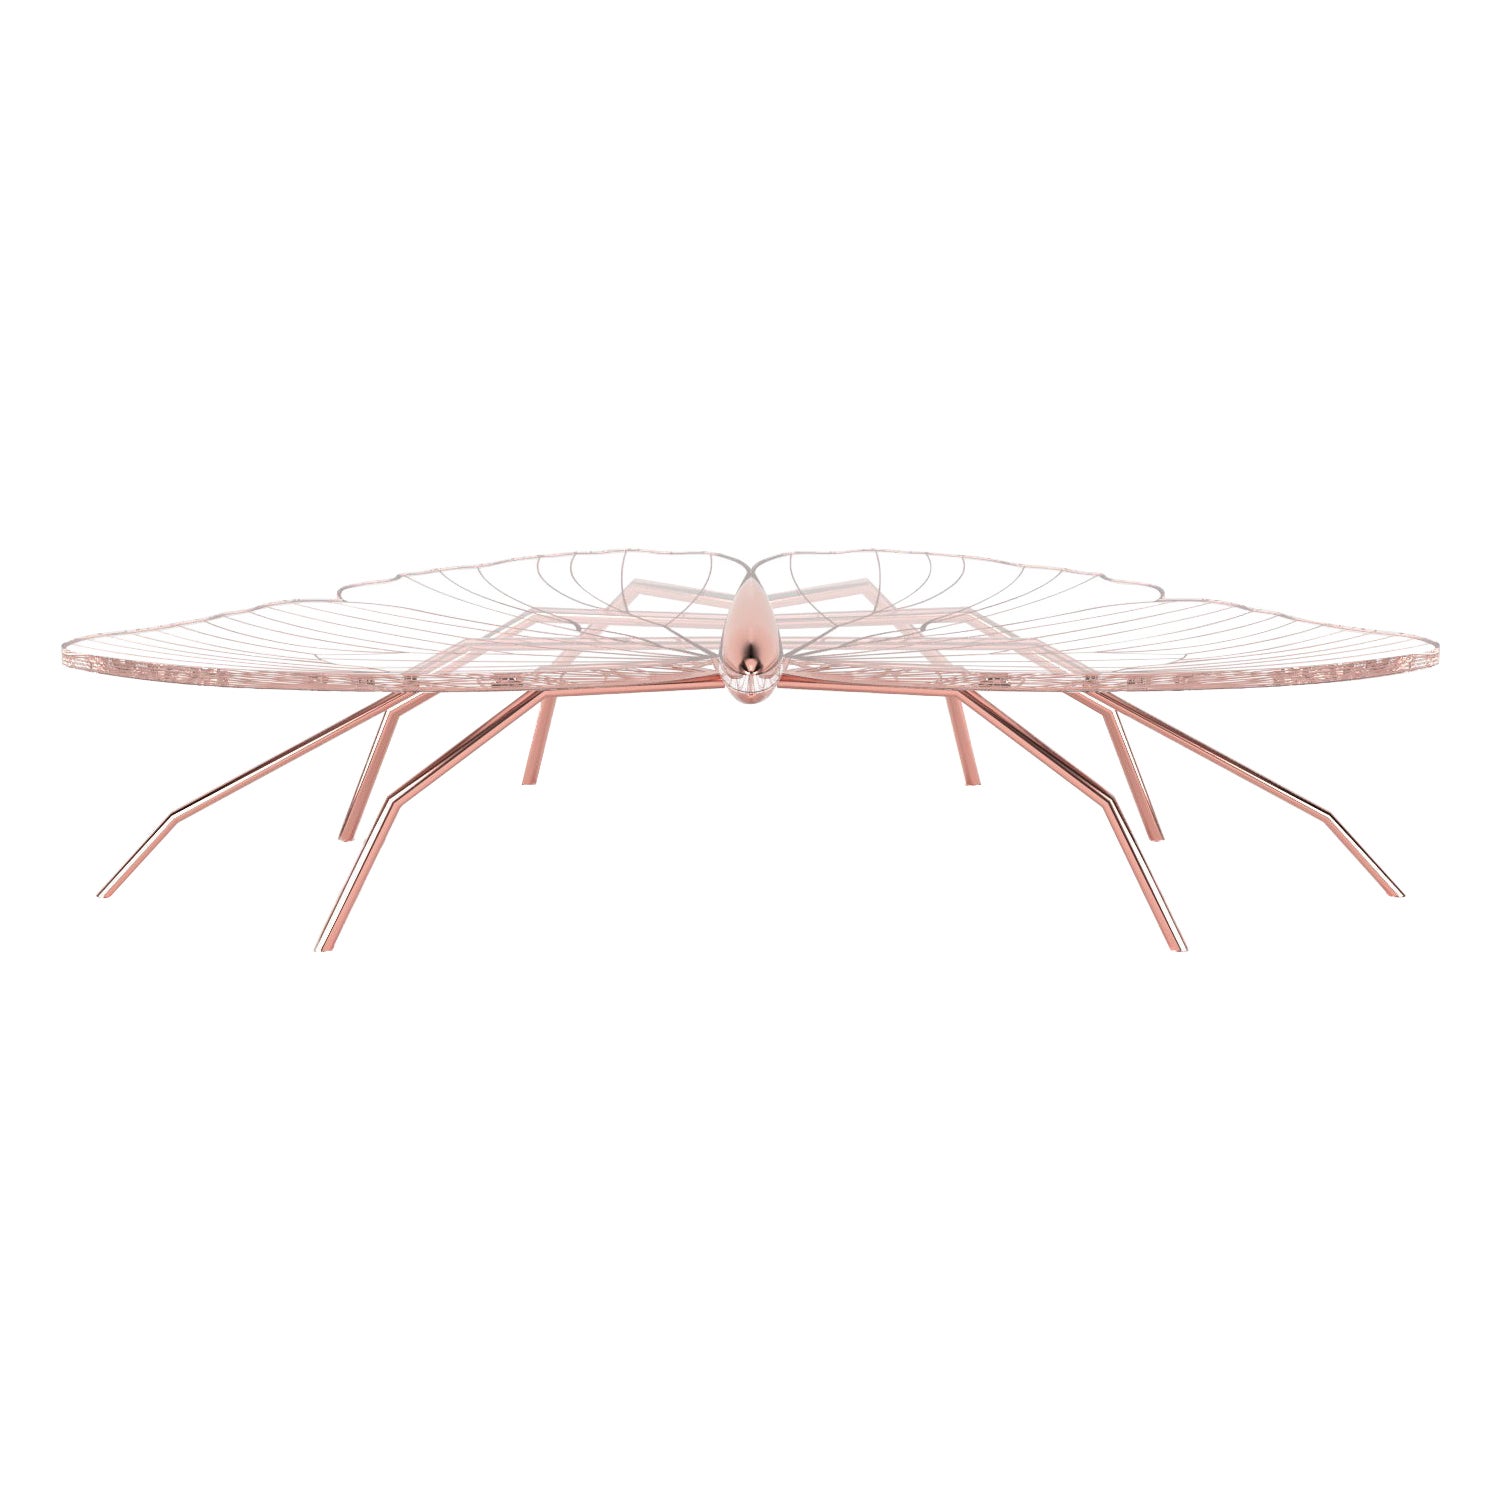 Our Nature Collection is eclectic and incomplete. We will always be waiting for Nature's next inspiration. The coffee table from this collection has a butterfly-inspired shape.

The legs can be made of polished brass or polished copper. The tabletop